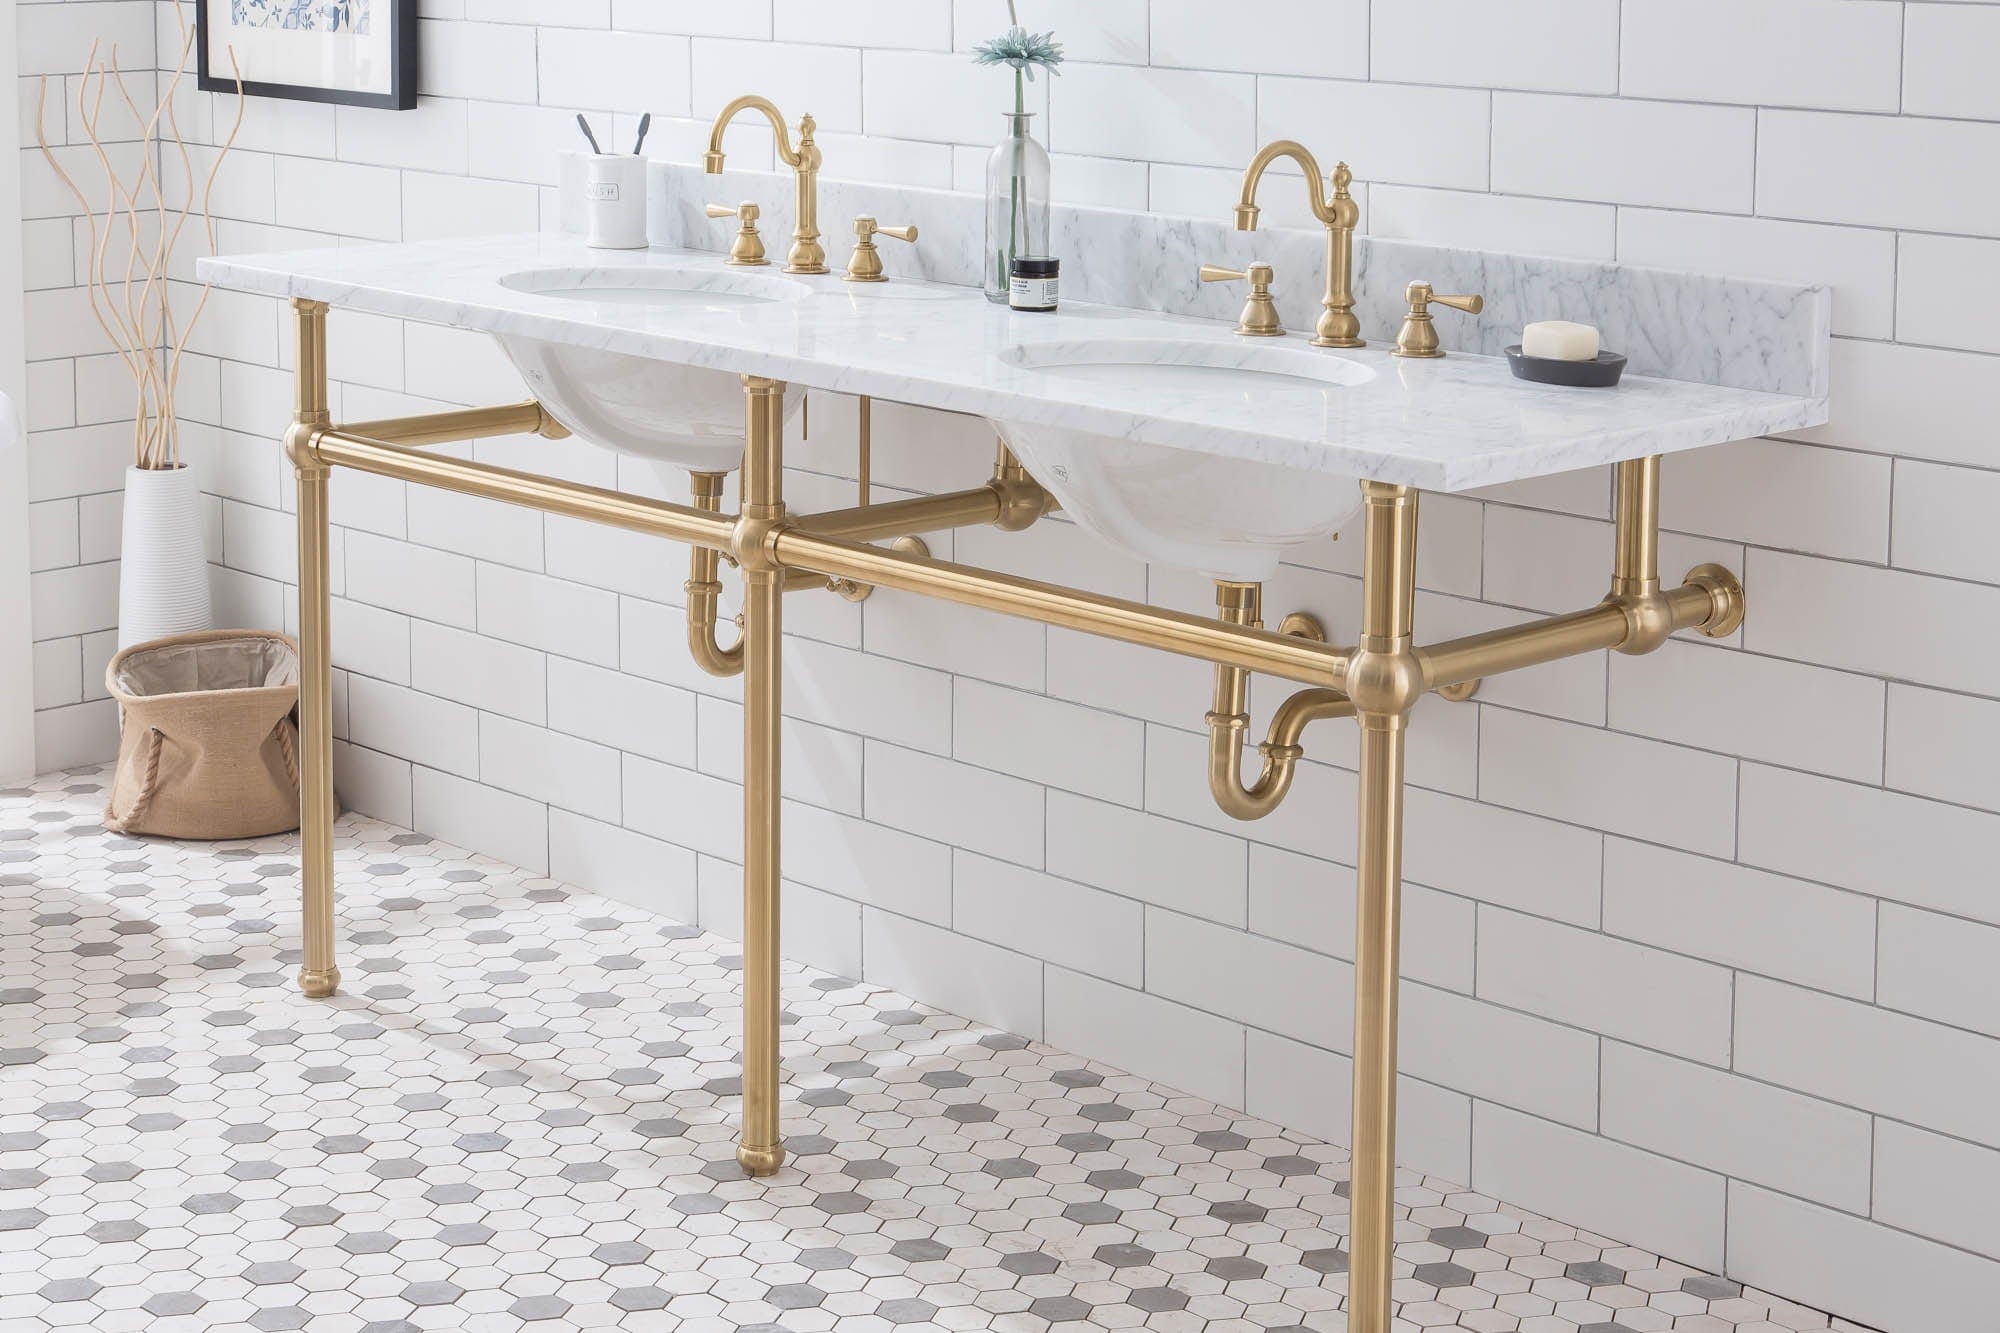 Embassy 72 Inch Wide Double Wash Stand and P-Trap included in Satin Gold Finish - Molaix732030762299EB72B-0600